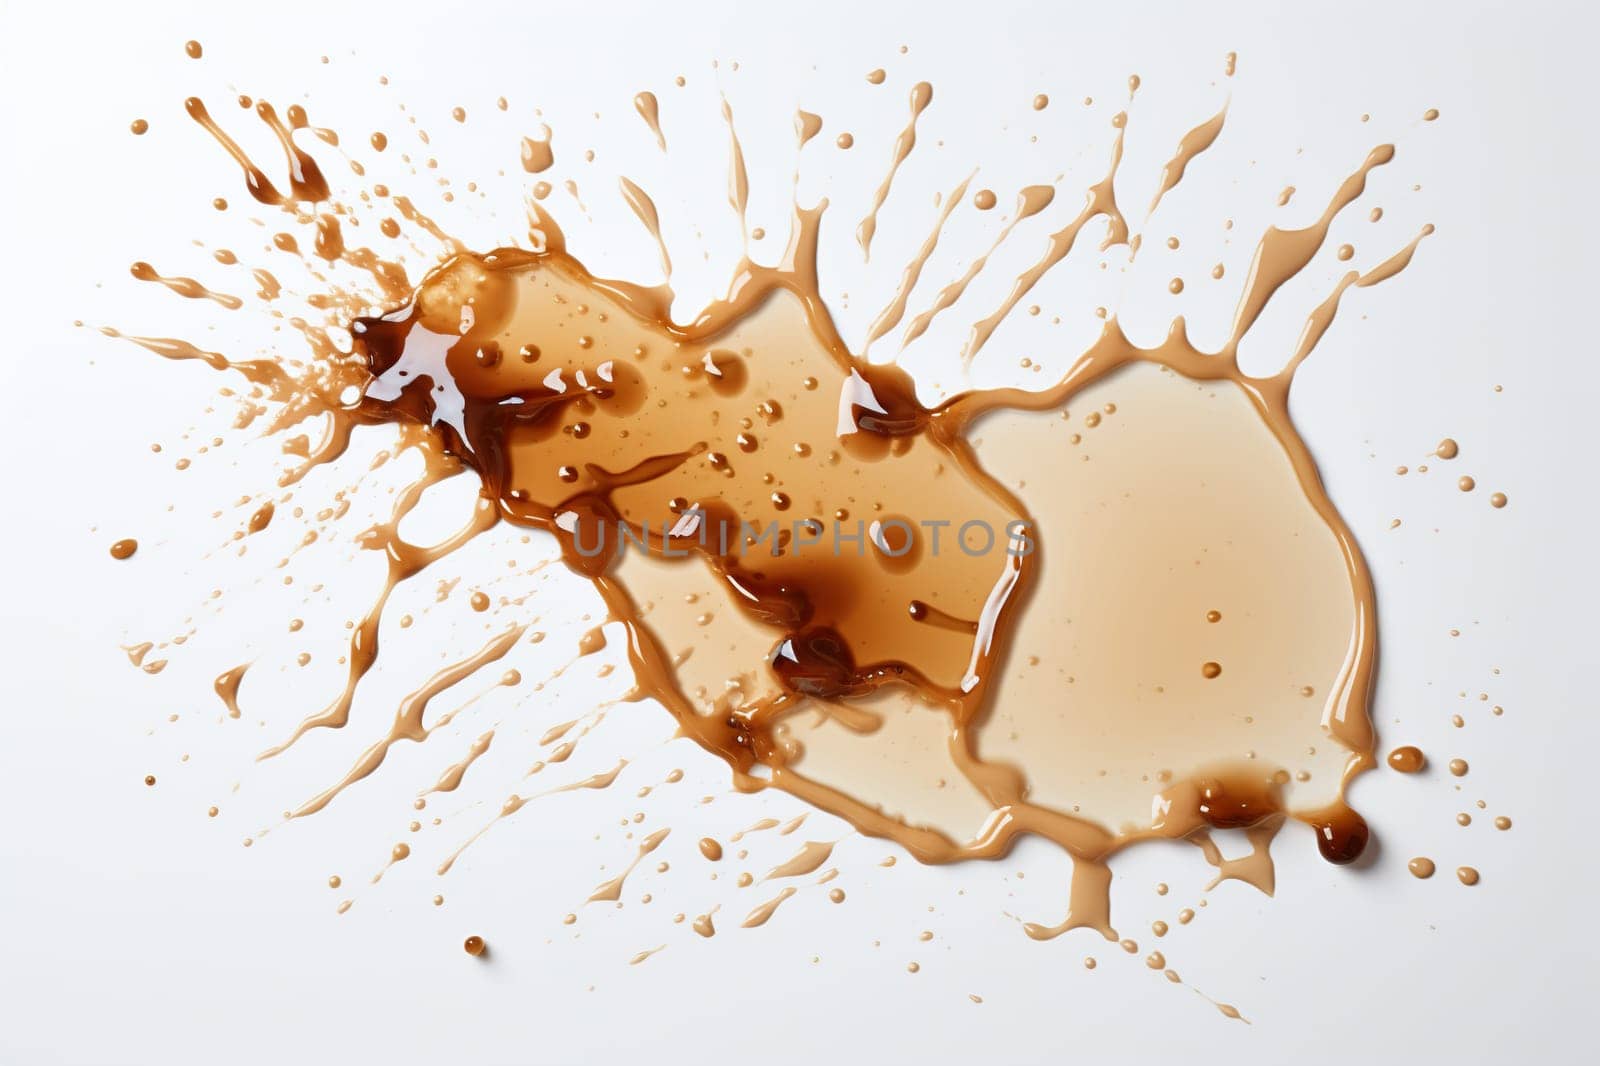 Splash, puddle of spilled black coffee on a white background. Abstract background.